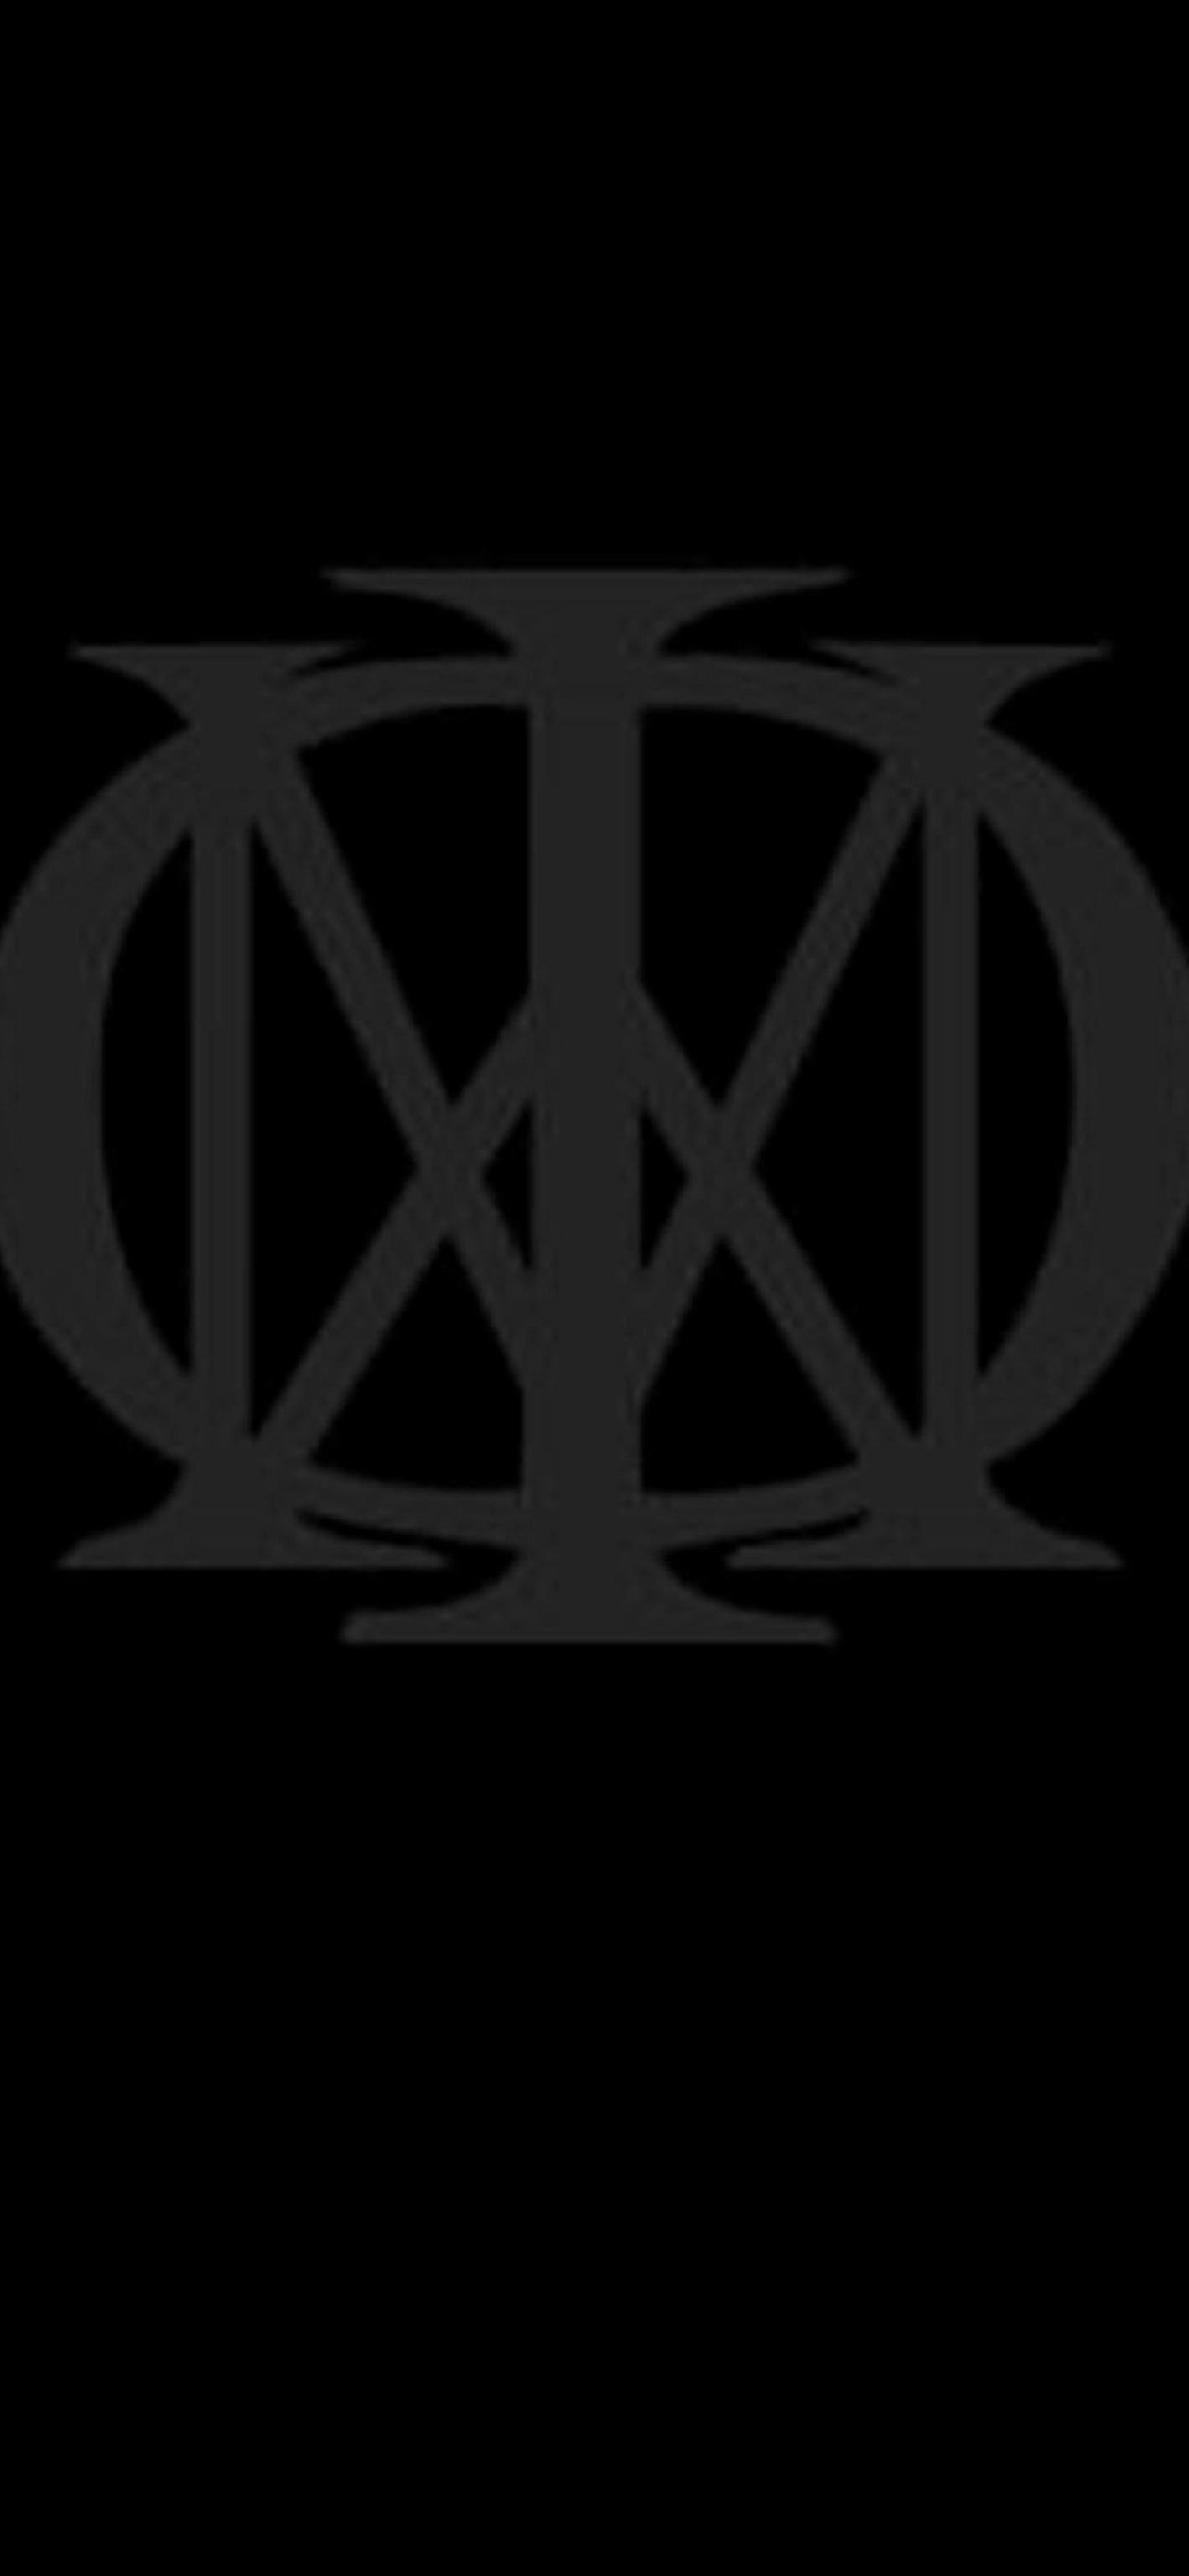 Dream Theater logo, iPhone wallpapers, Backgrounds, 1420x3080 HD Handy